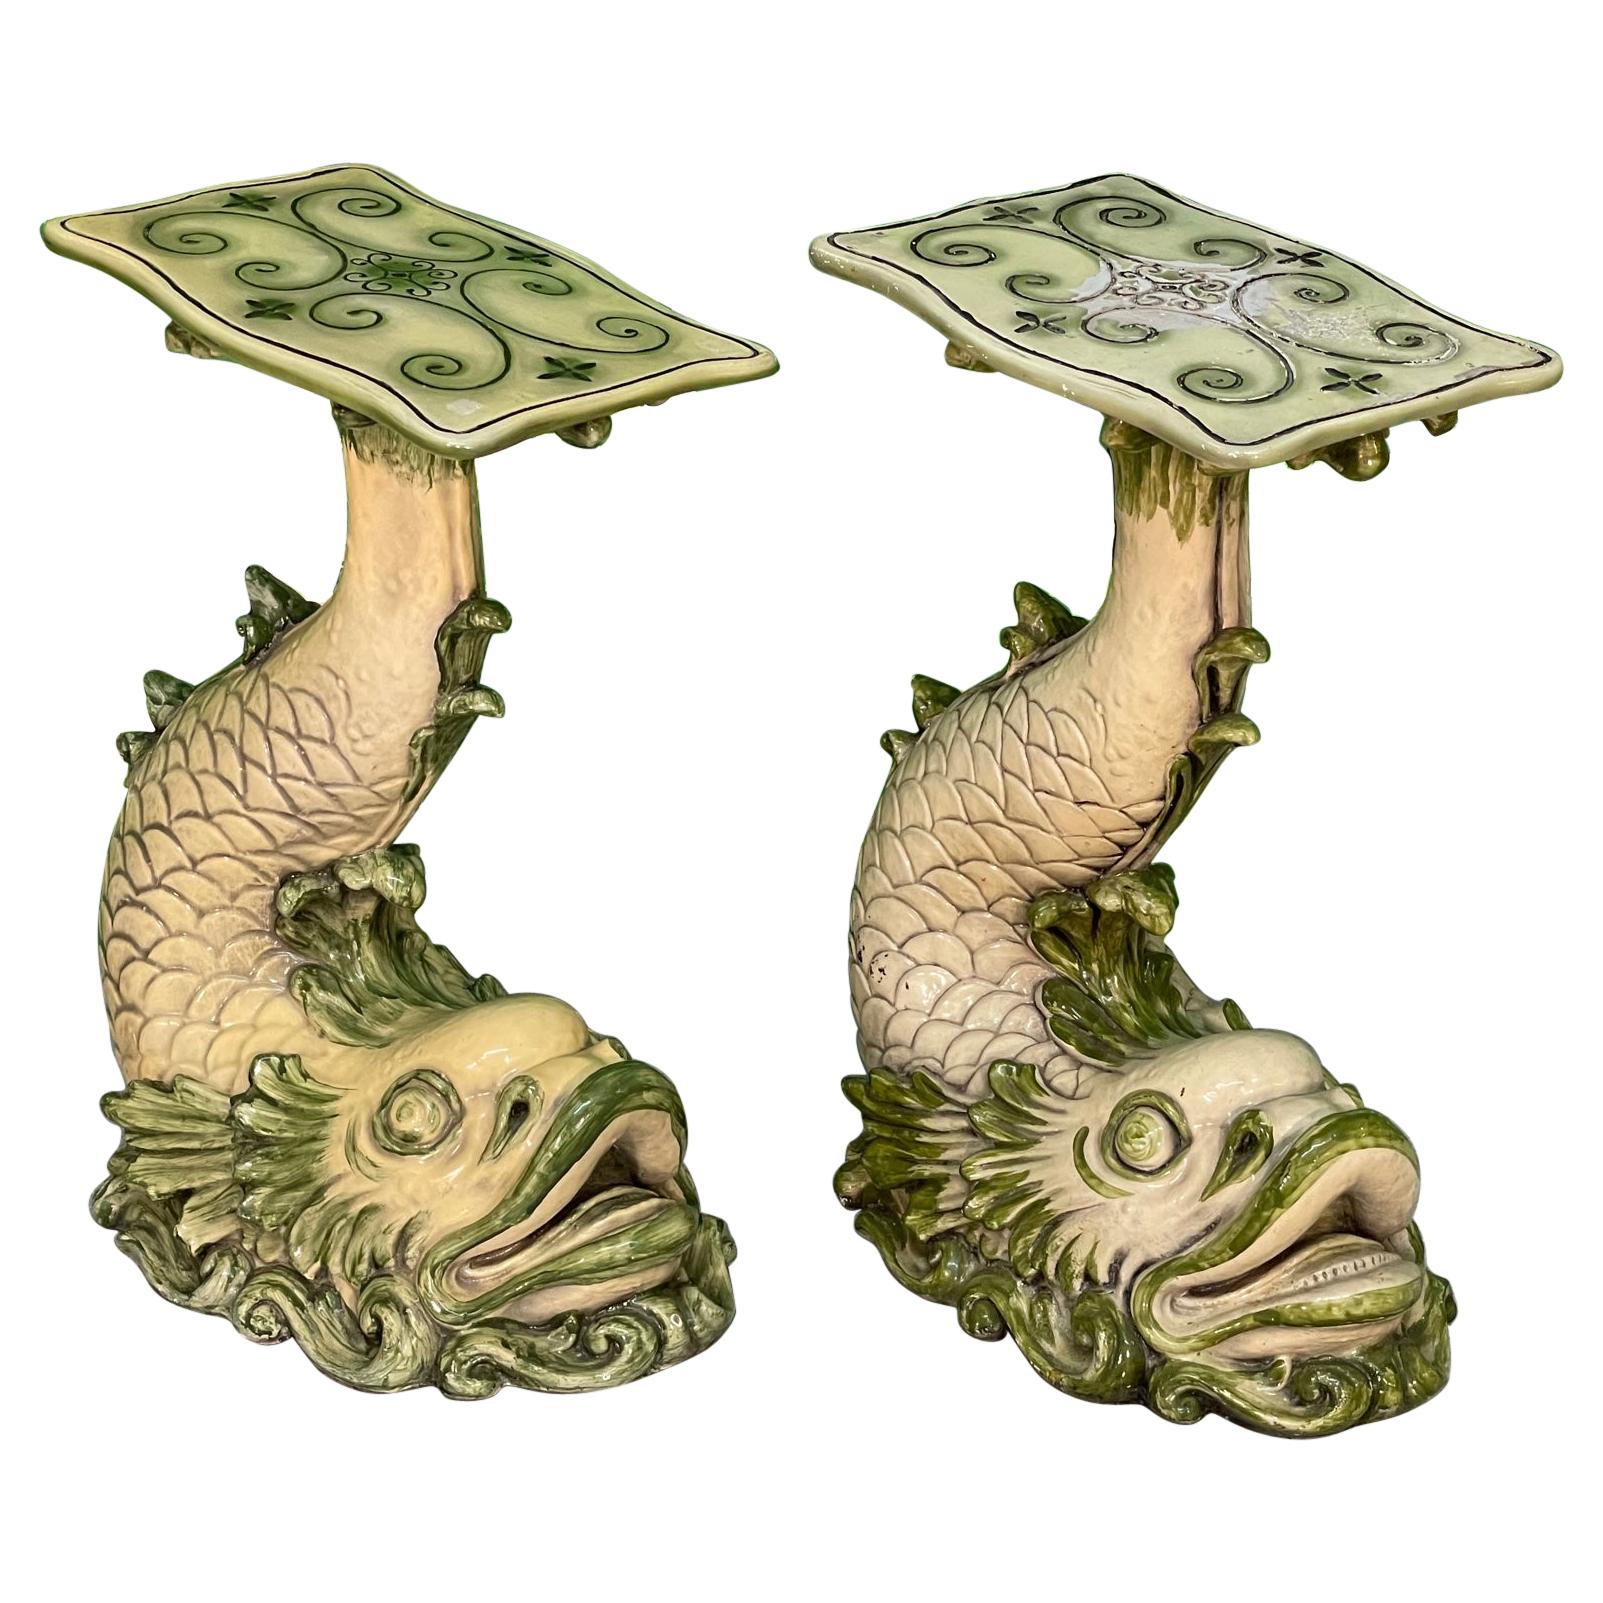 Asian Koi Fish Side Tables by Marwal, a Pair